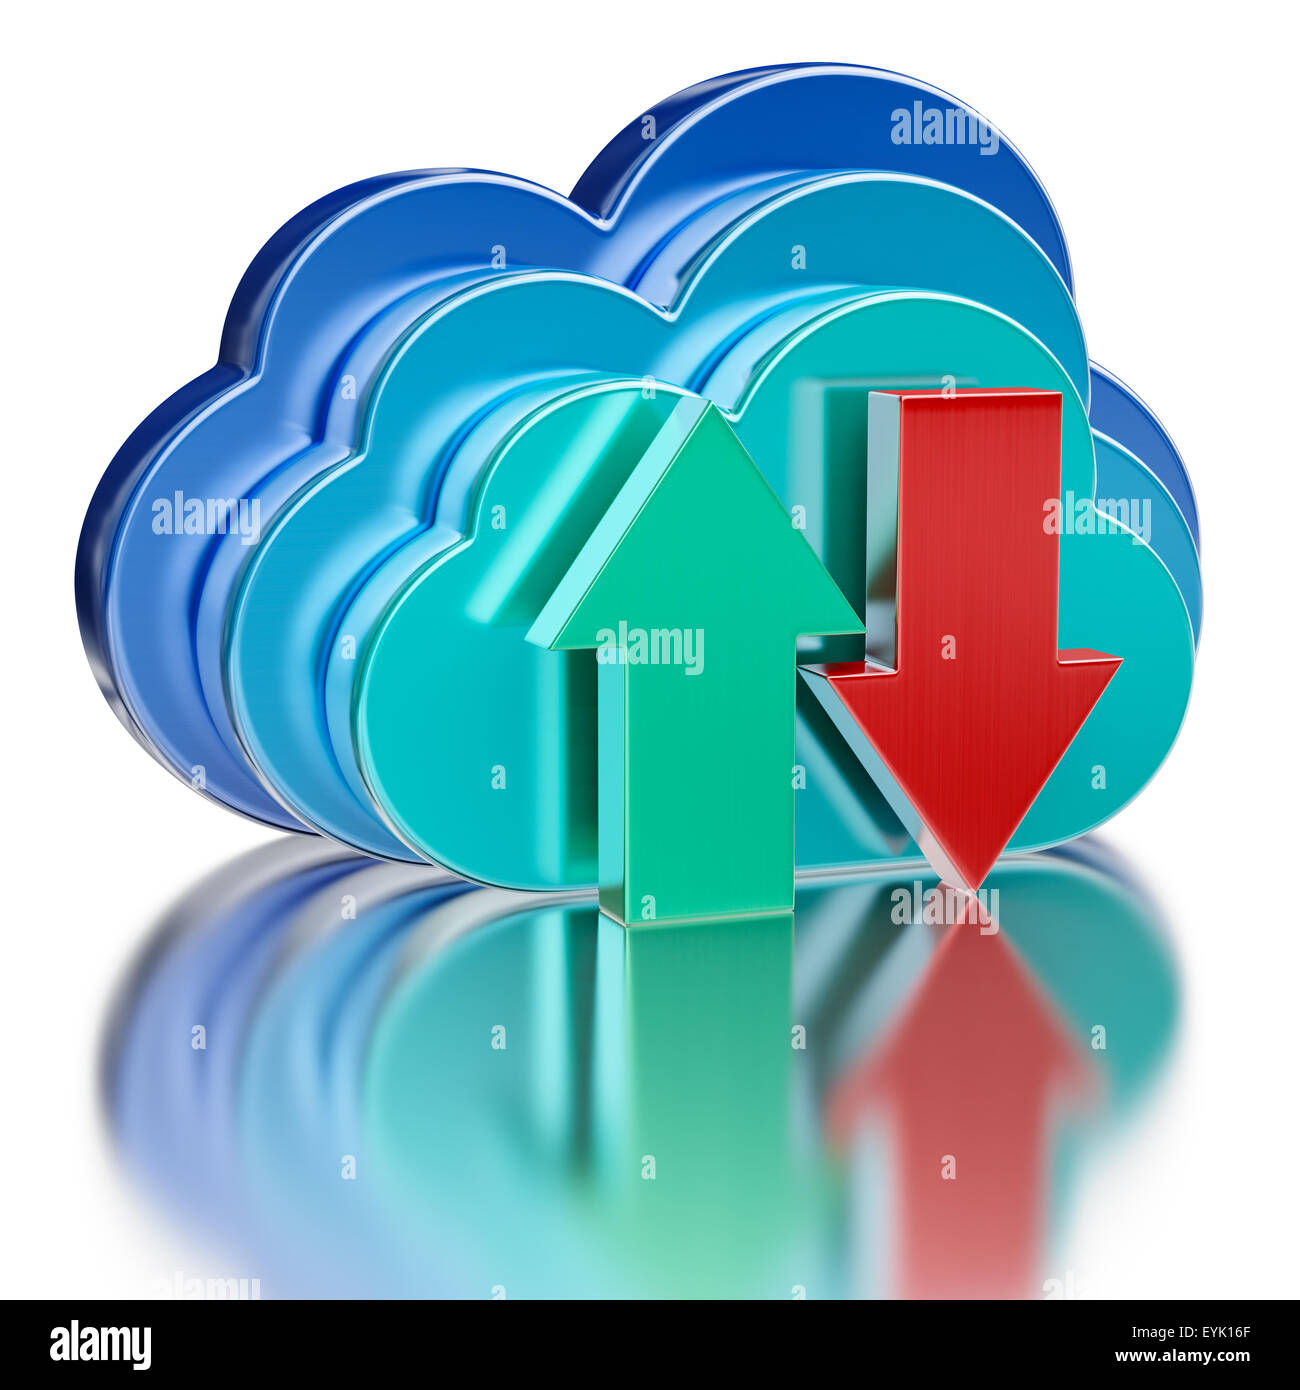 Remote database cloud computing technology storage upload download concept - 3 metal glossy cloud icons and download and upload  Stock Photo